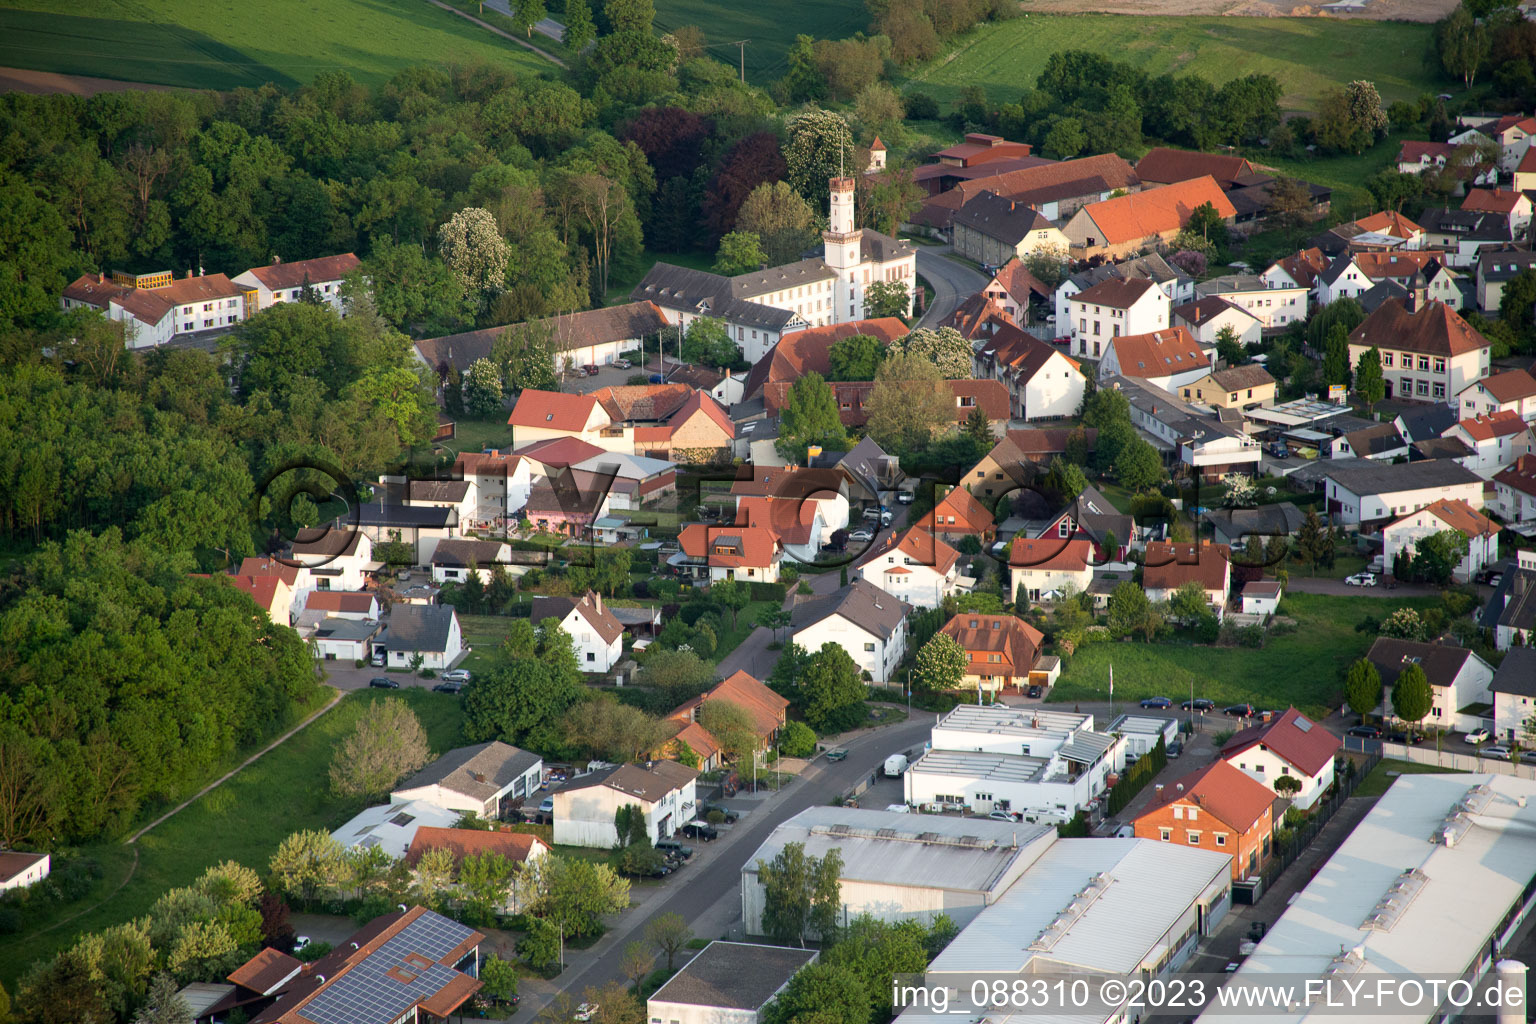 Drone image of Hüttenfeld in the state Hesse, Germany